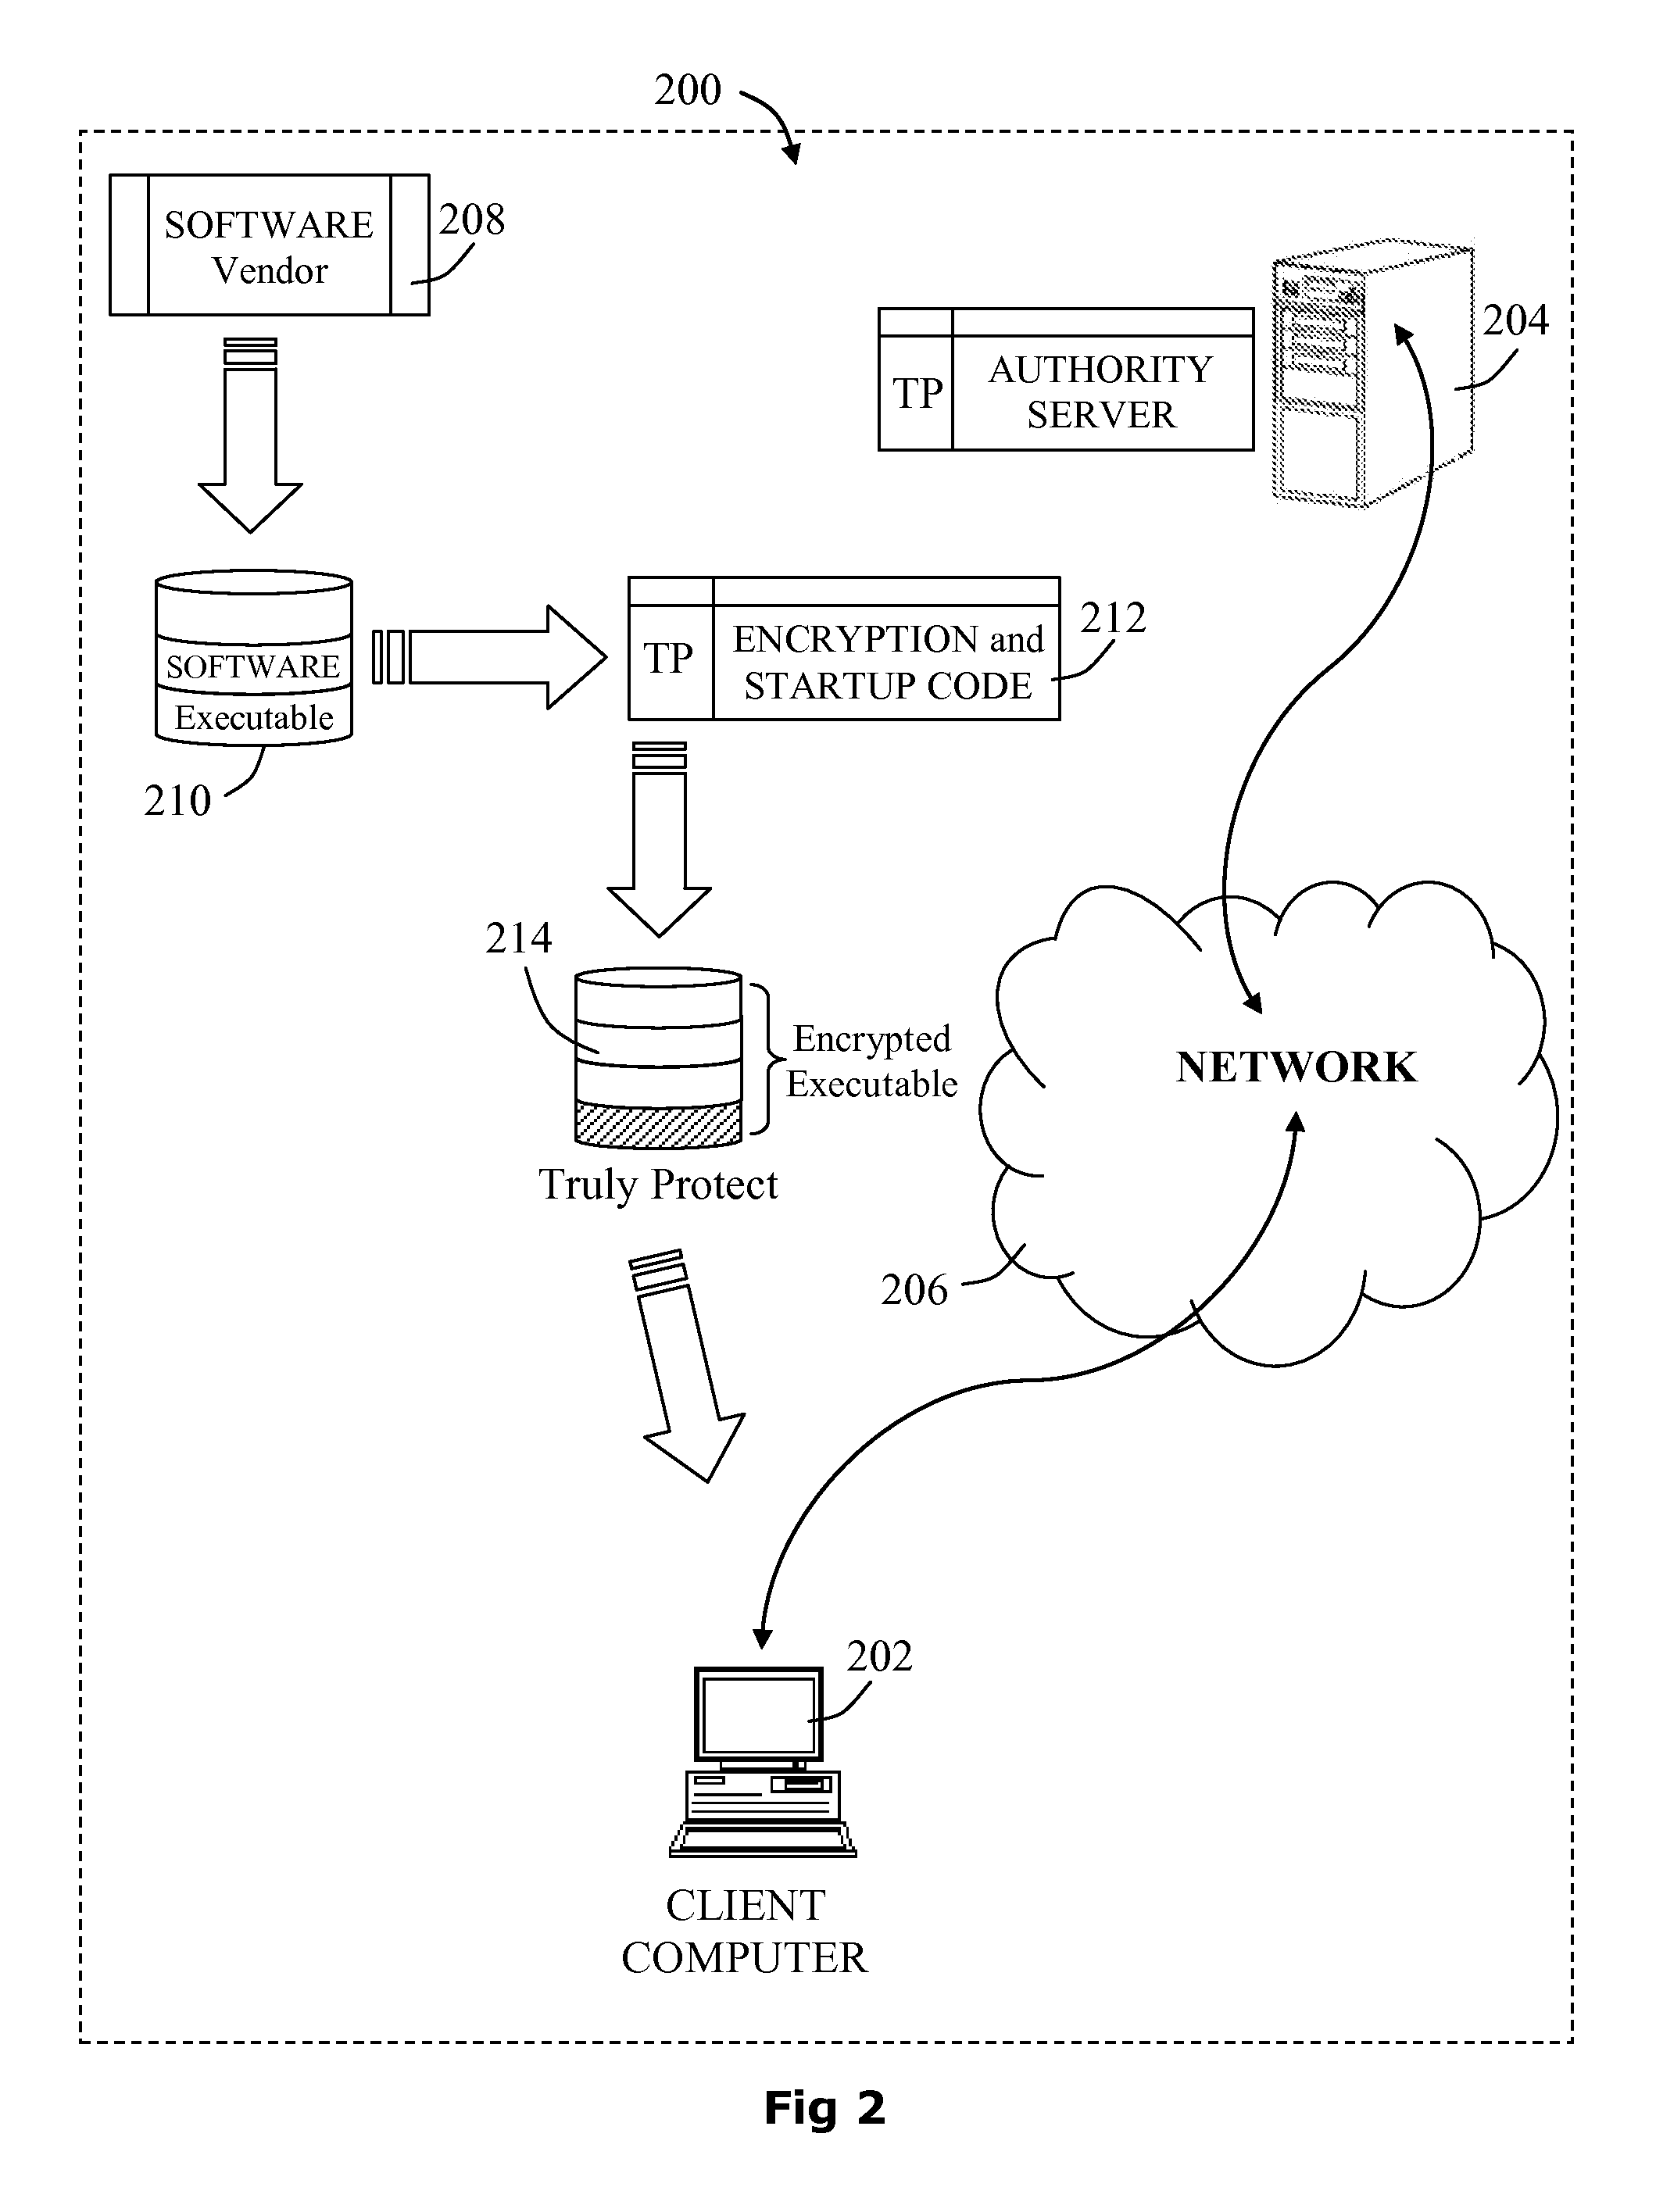 System and methods for CPU copy protection of a computing device